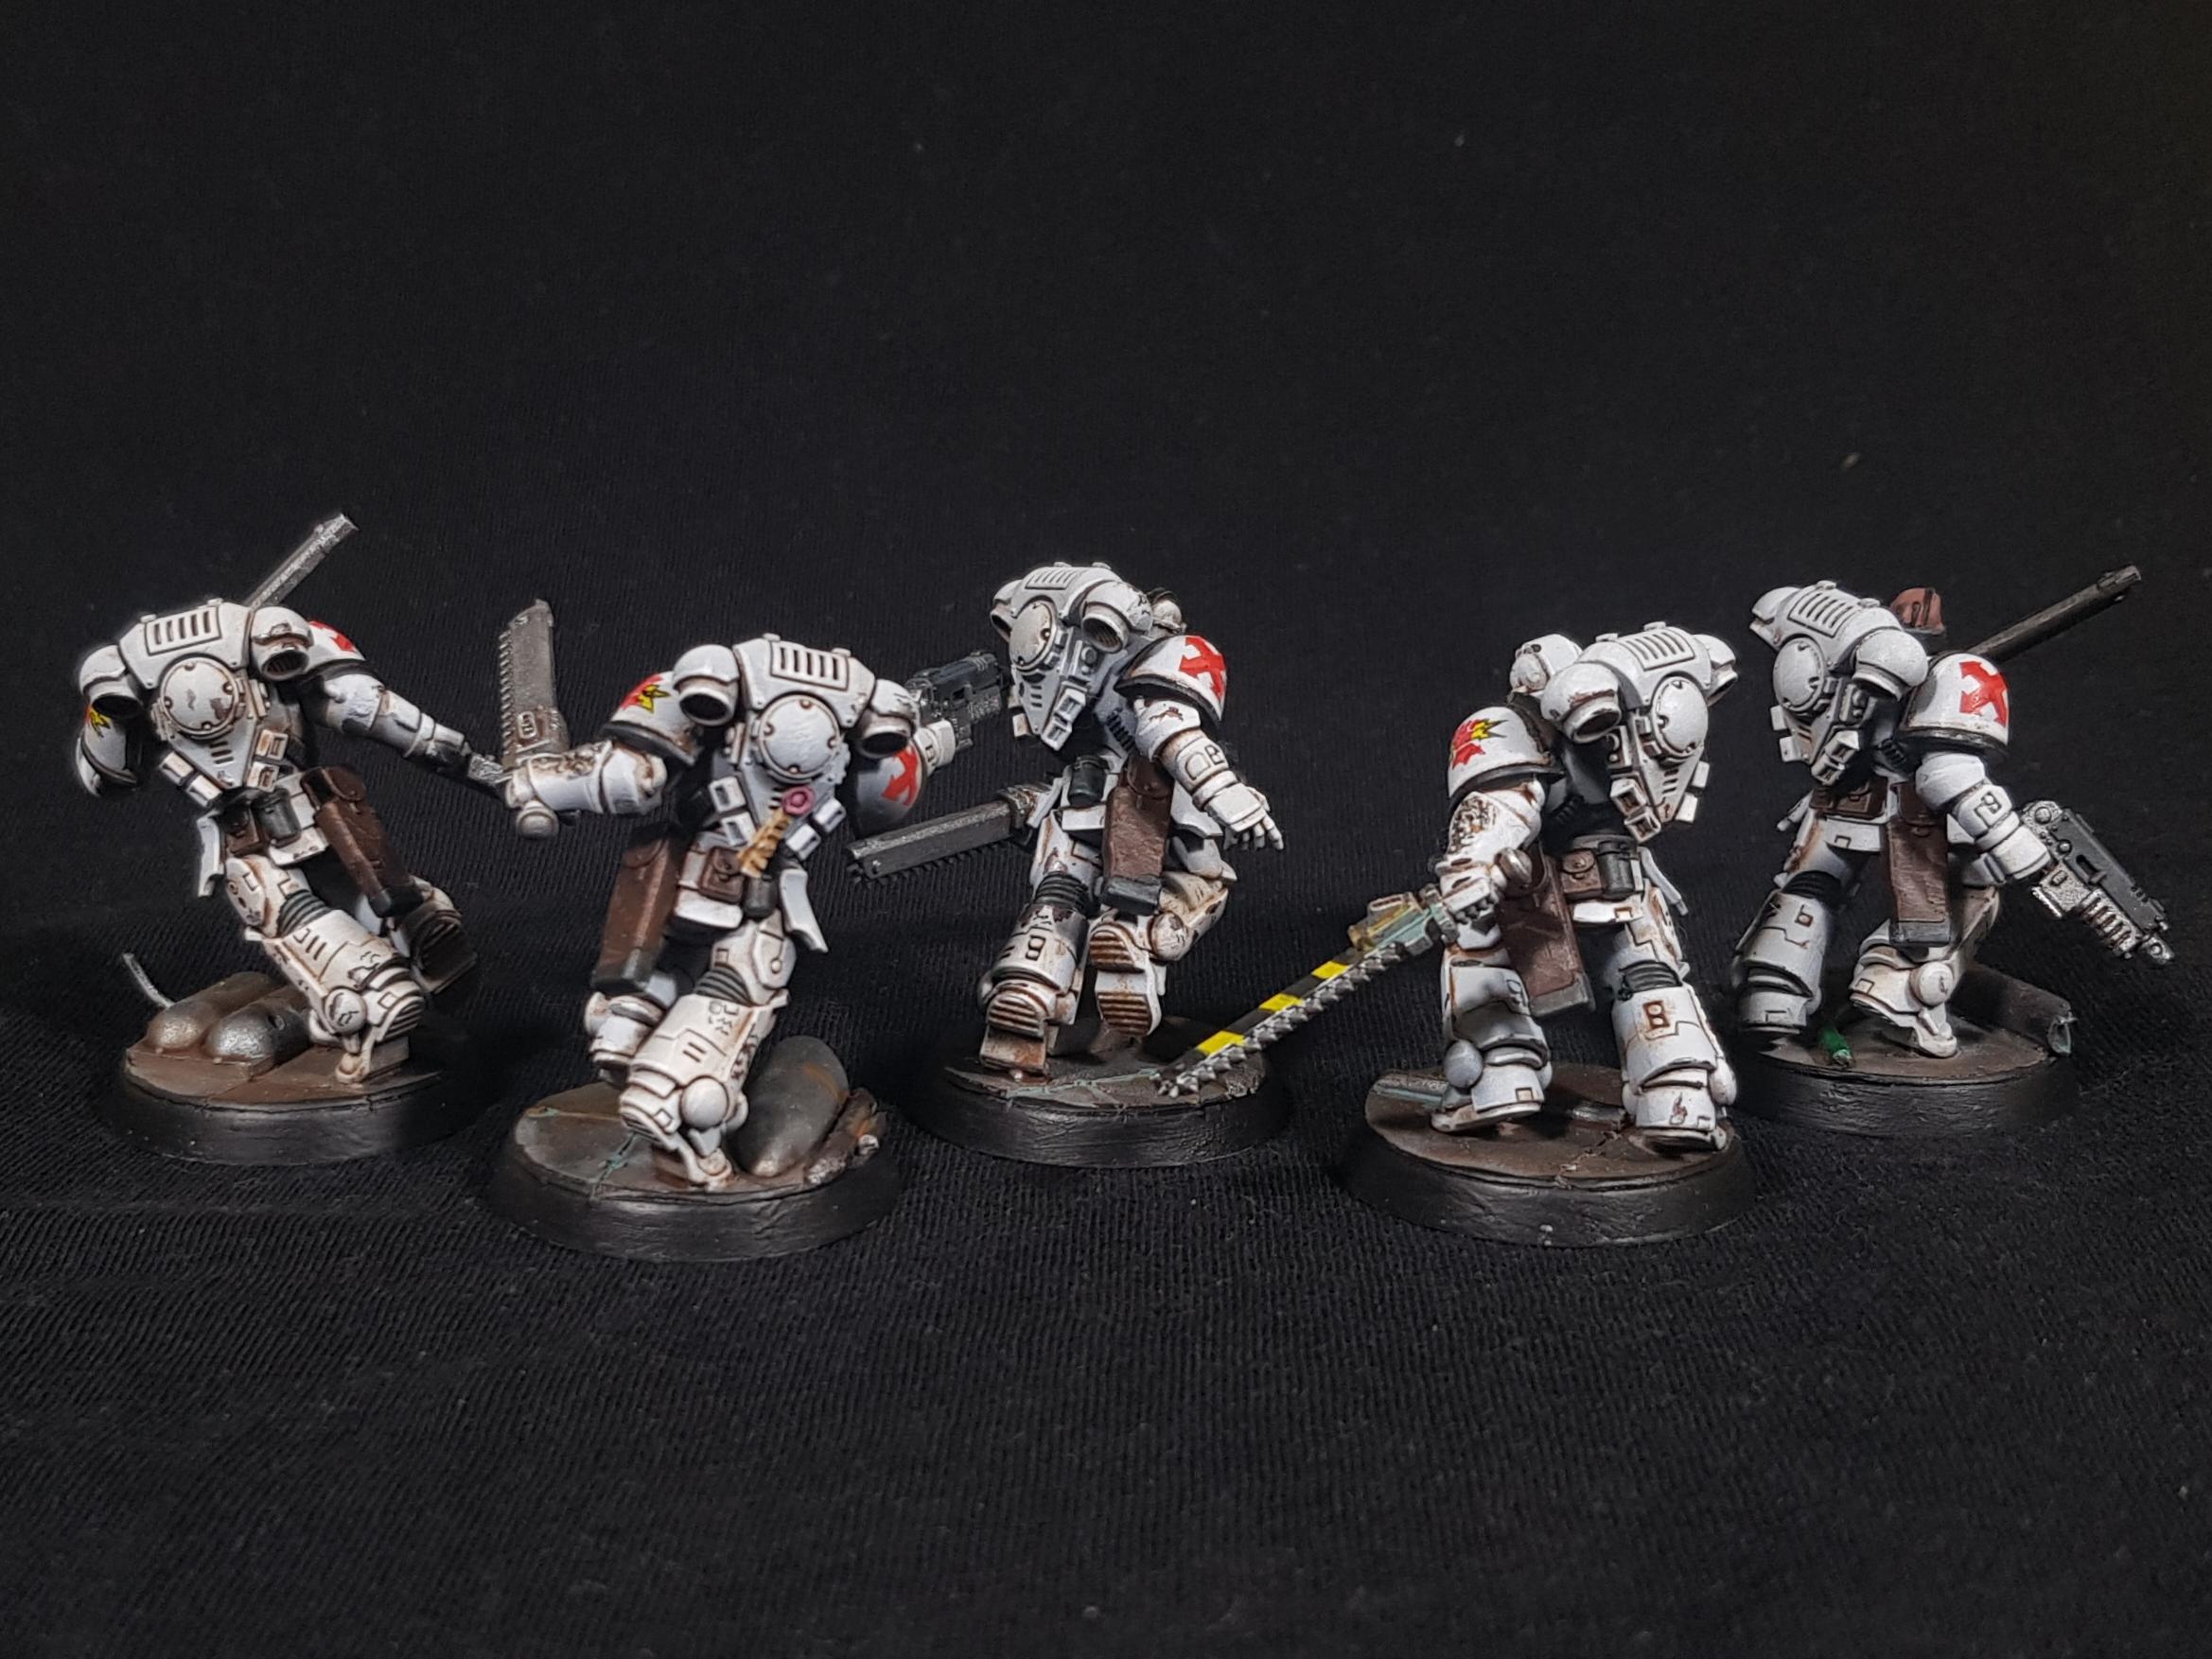 5th Company, Battle Damage, Chainsword, Excoriators, Imperial Fists, Intercessors, Last Wall, Primaris, Space Marines